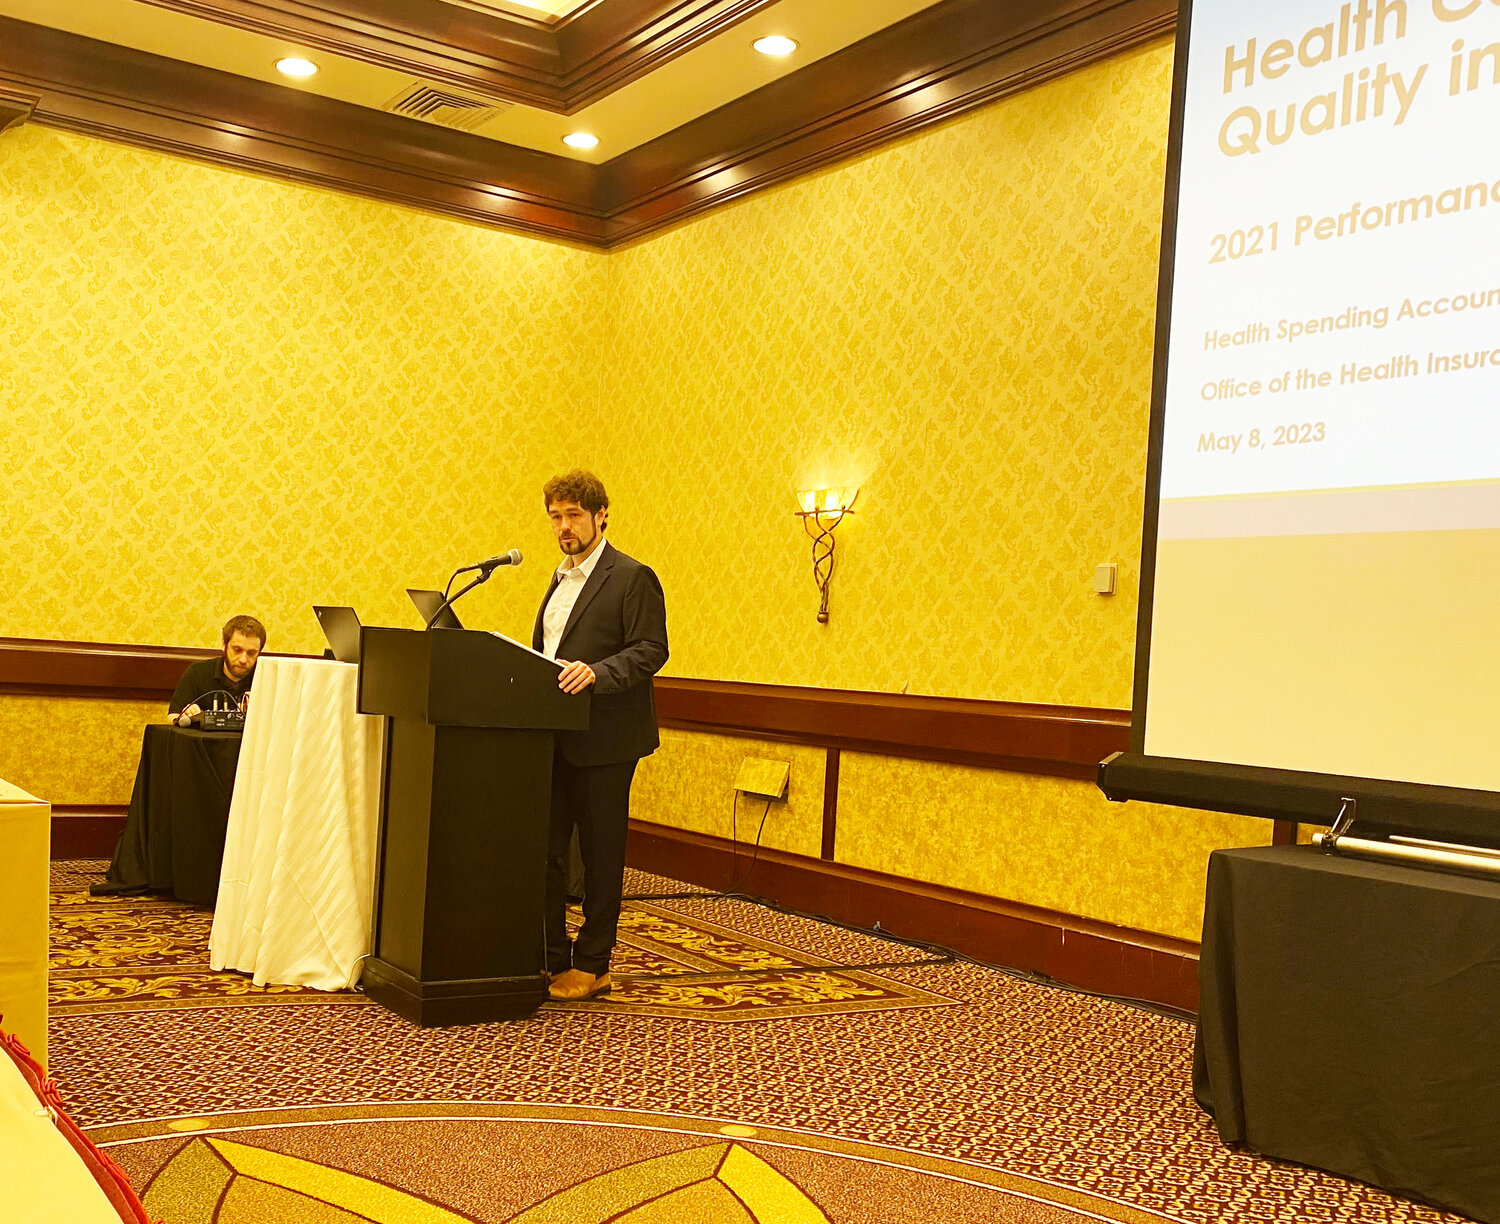 Cory King, Acting R.I. Health Insurance Commissioner, speaking at the public forum on Health Care Spending Trends in Rhode Island, held on Monday, May 8.